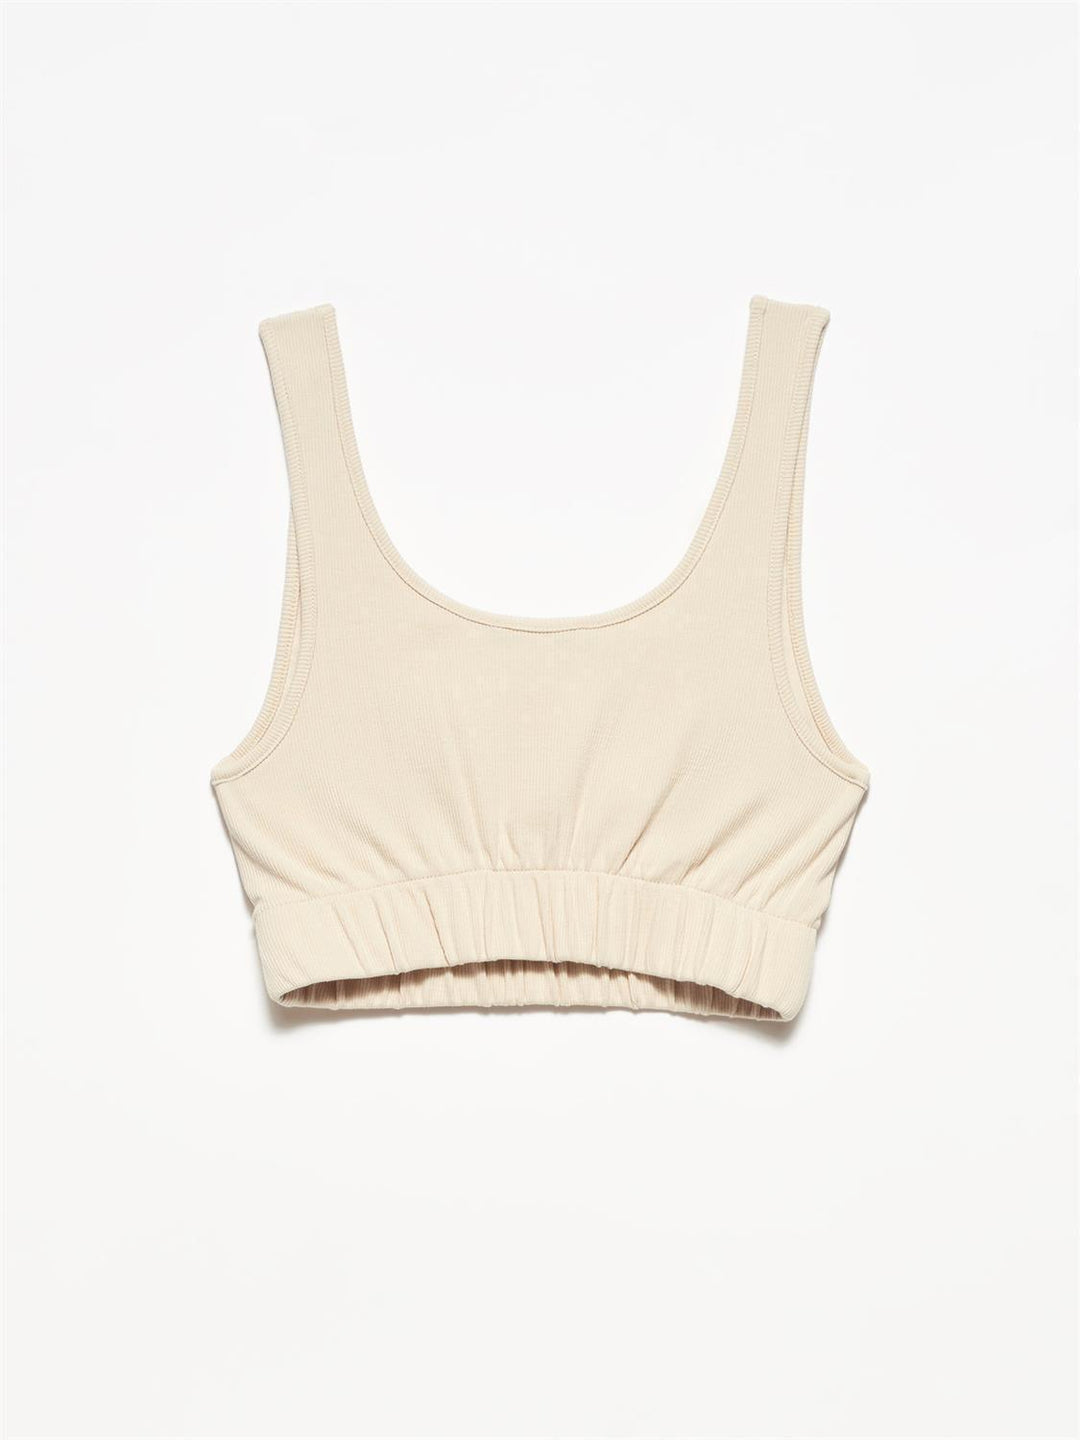 Lux Strappy Top - 7Kouture